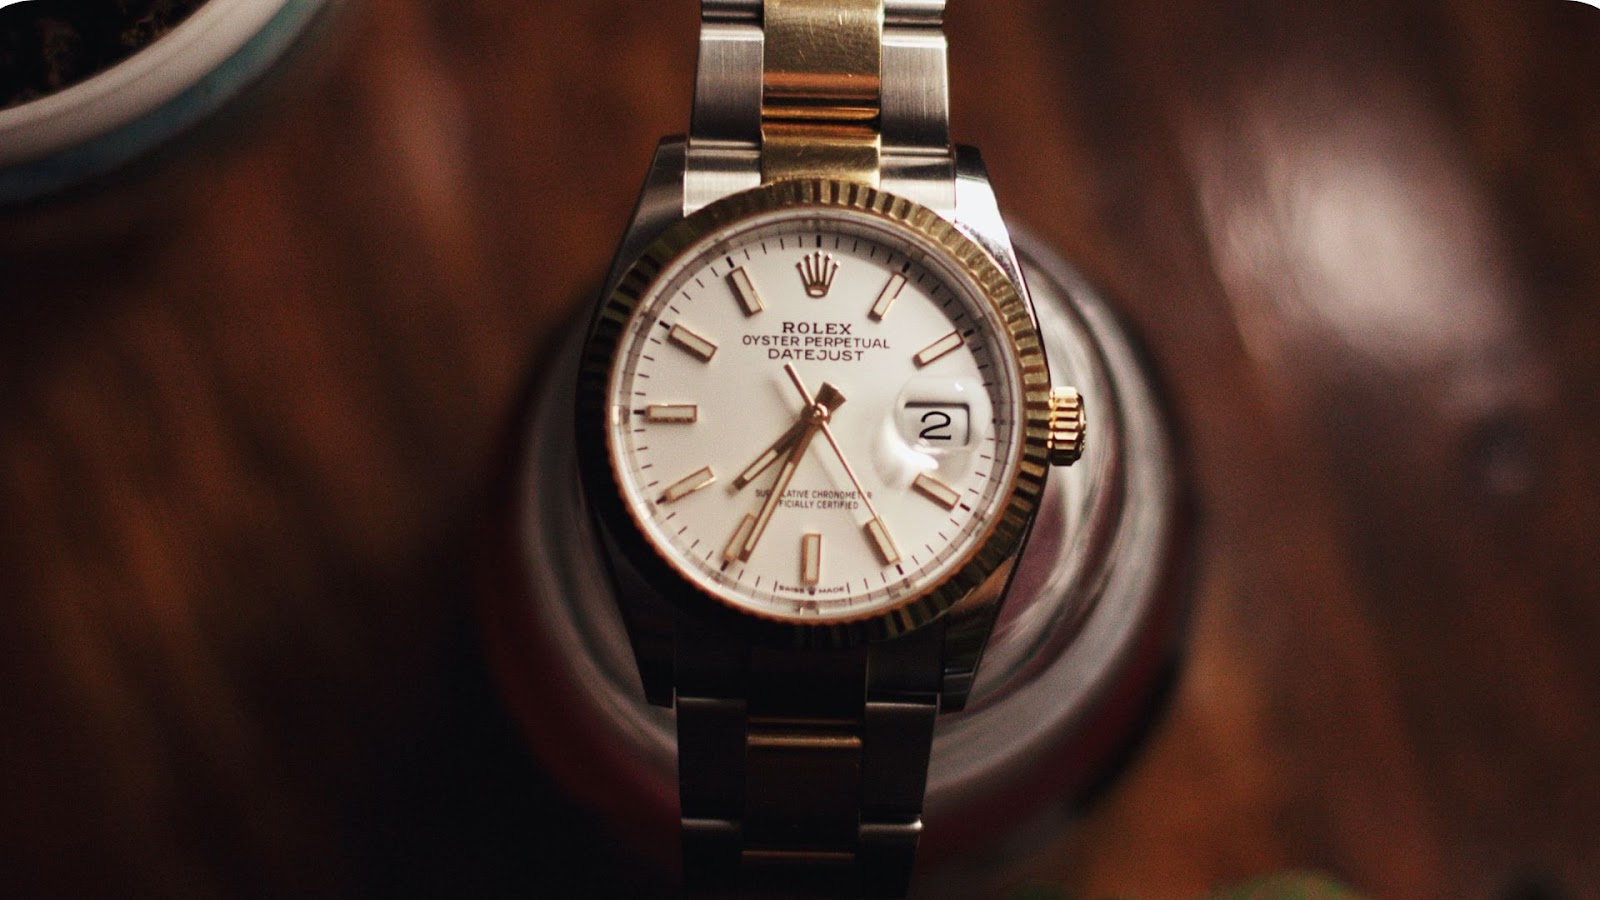 How to Set Time On a Rolex Watch